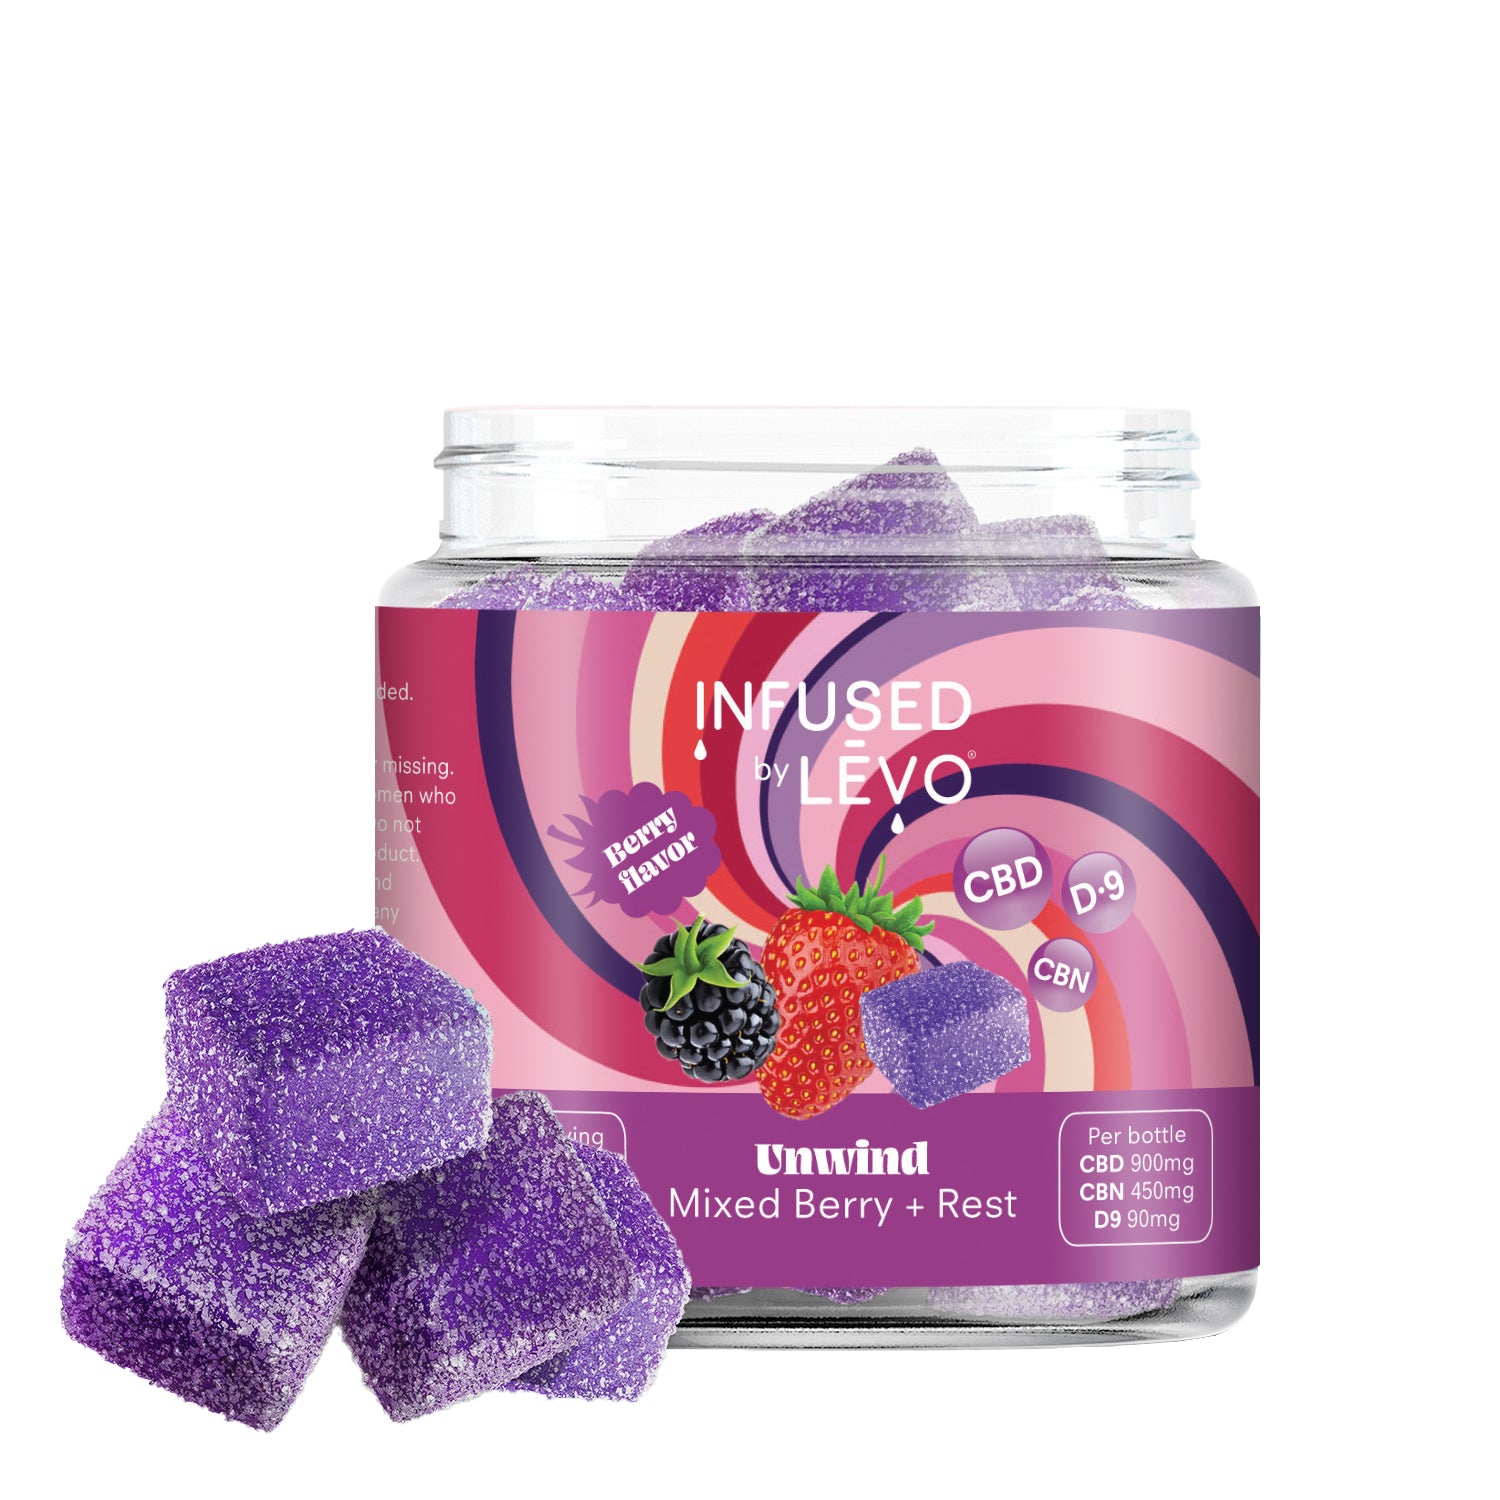 Infused by LEVO Unwind Gummies blackberry flavored for rest. One bottle of gummies.